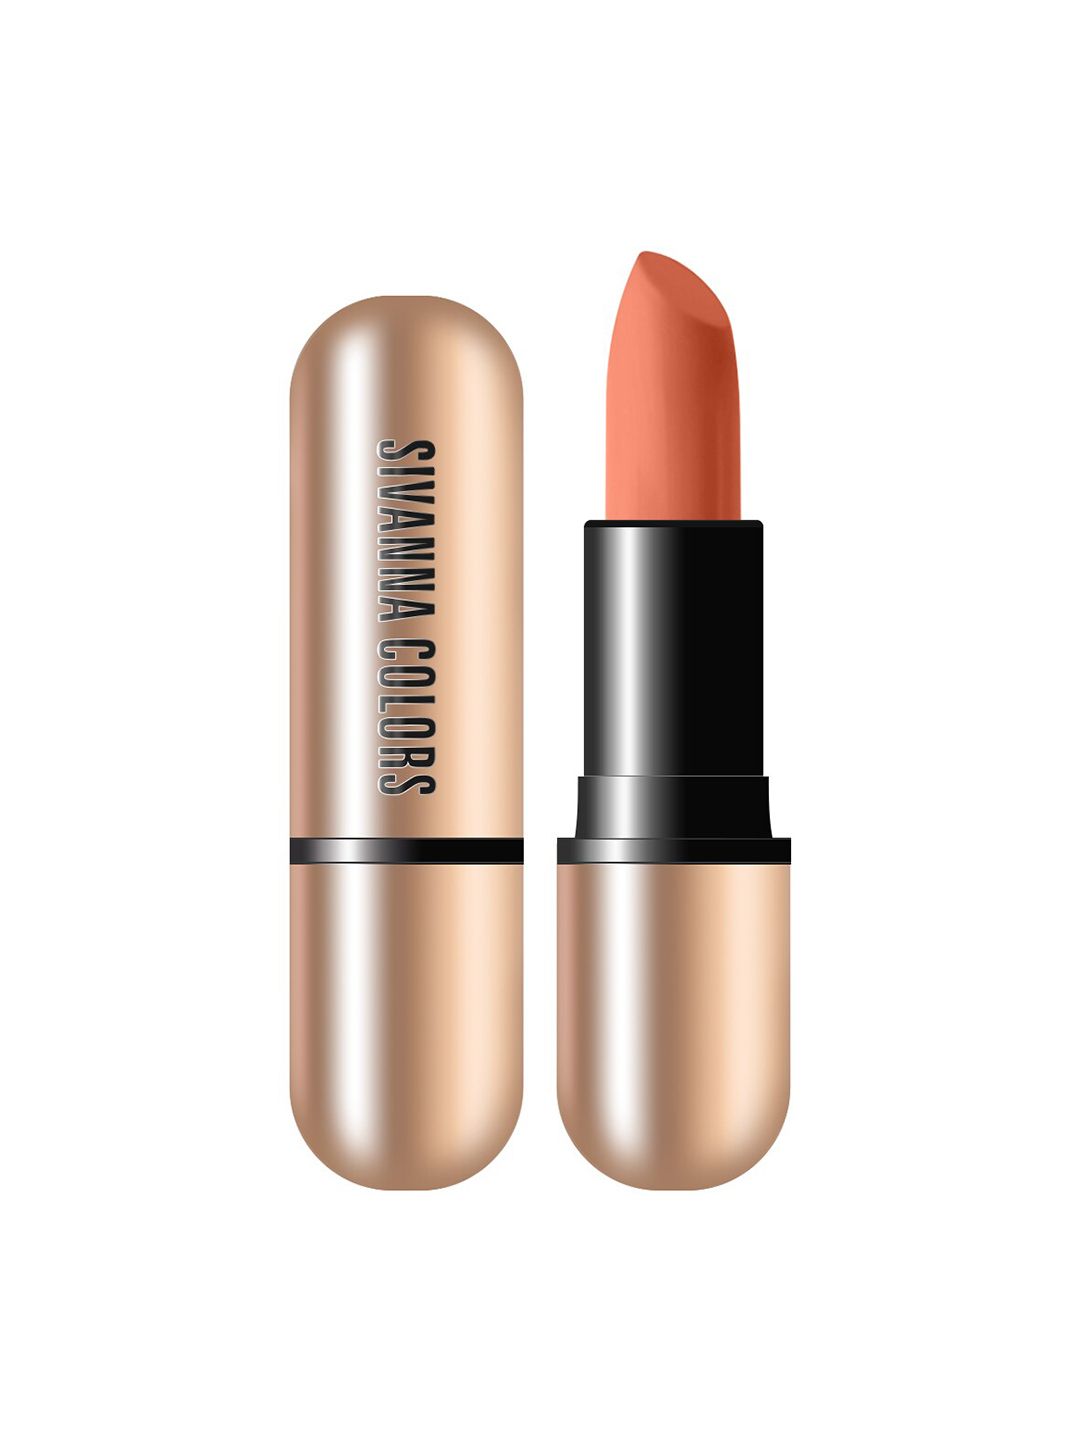 Sivanna Colors Matte Stay Lipstick Kiss Me - HF688 02 Price in India